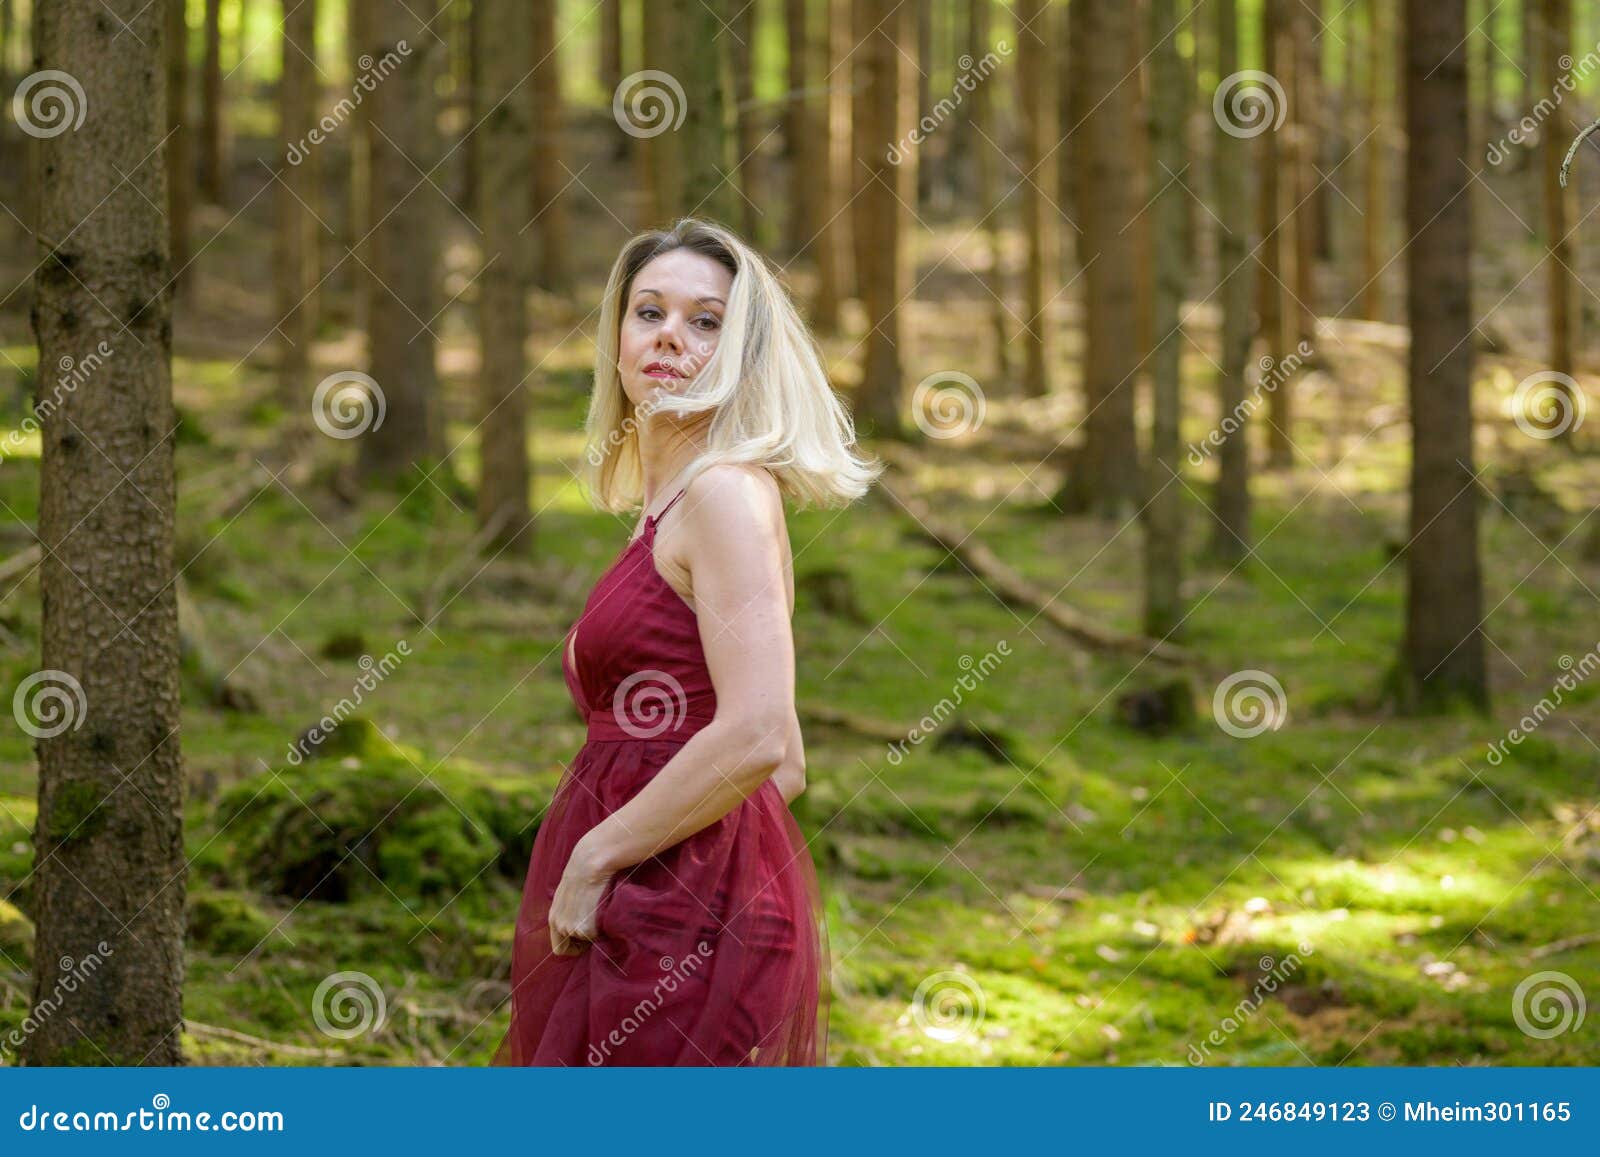 Blond Woman Turning Around Against Trees In Woods Stock Image Image